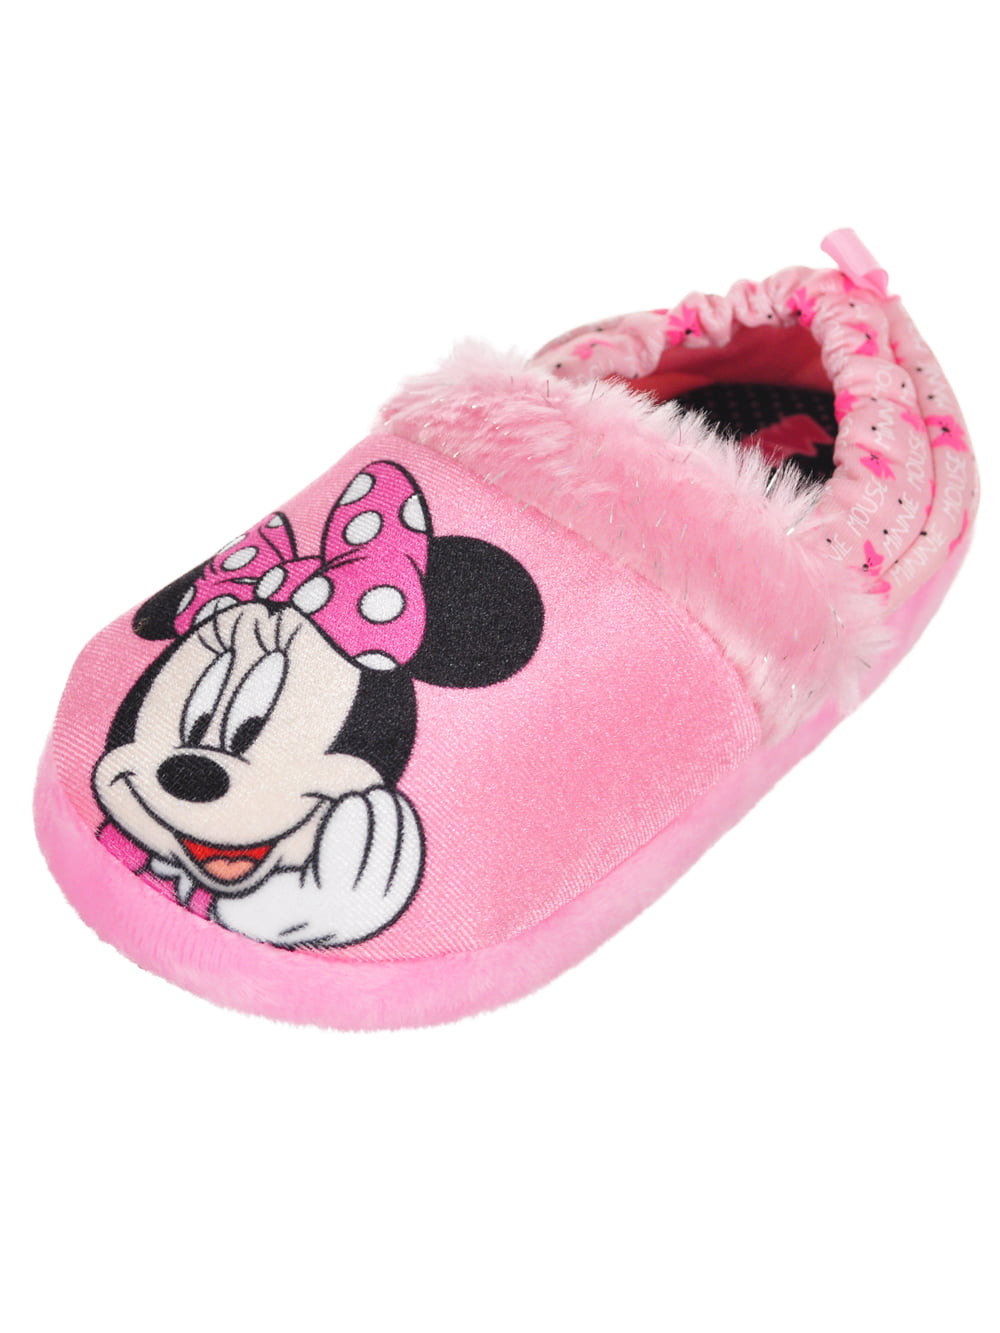 Disney Minnie Mouse Girls' Slippers 